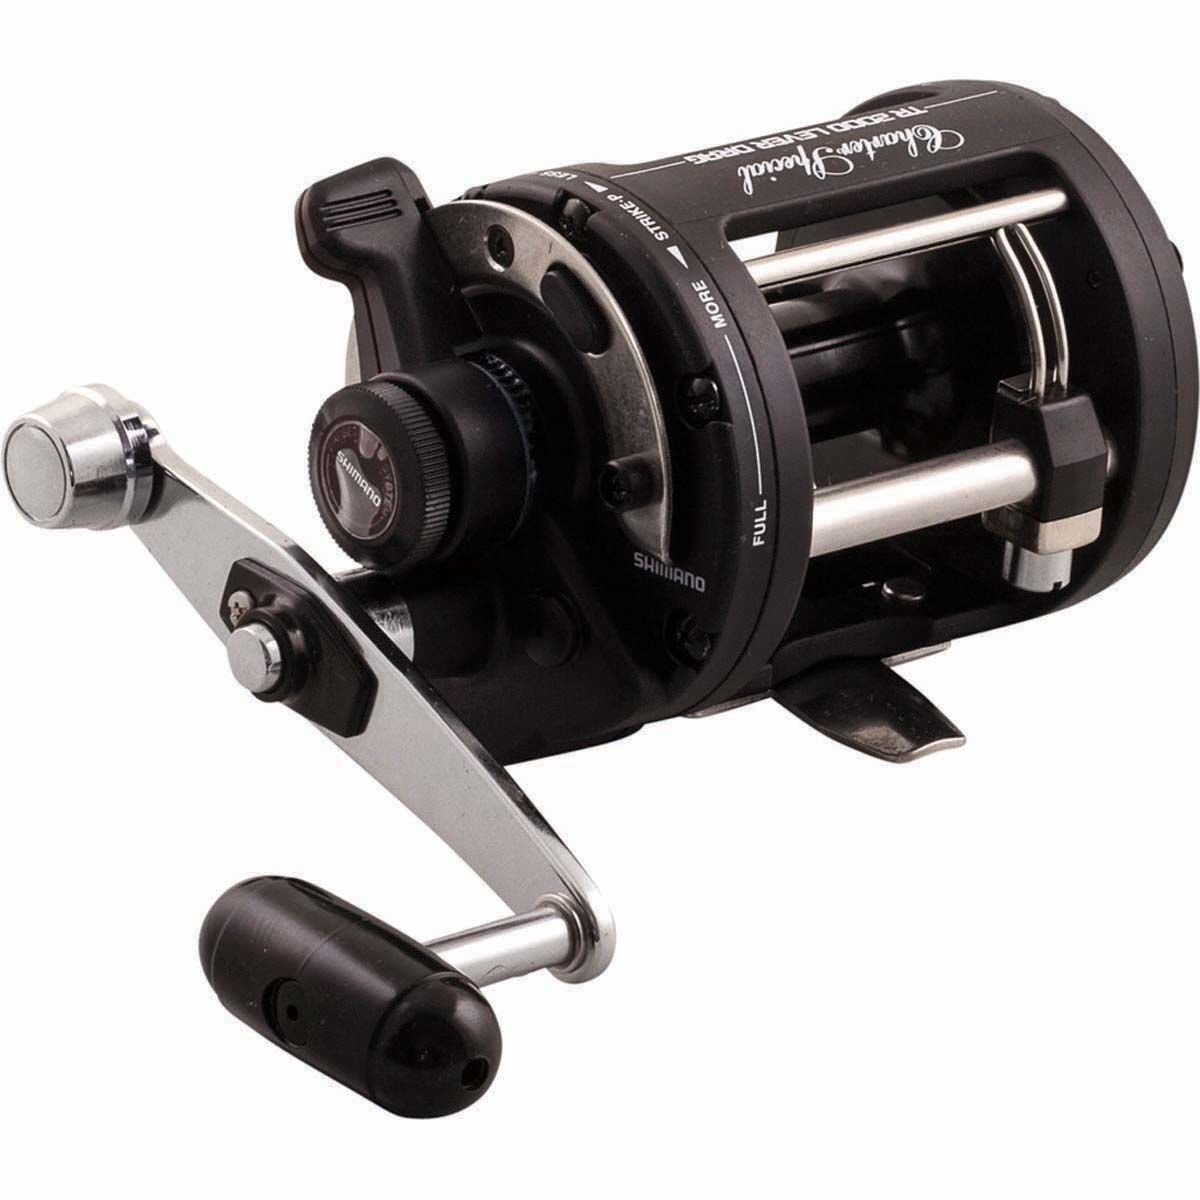 Buy Shimano Overhead Reel Cover Small Baitcaster online at Marine